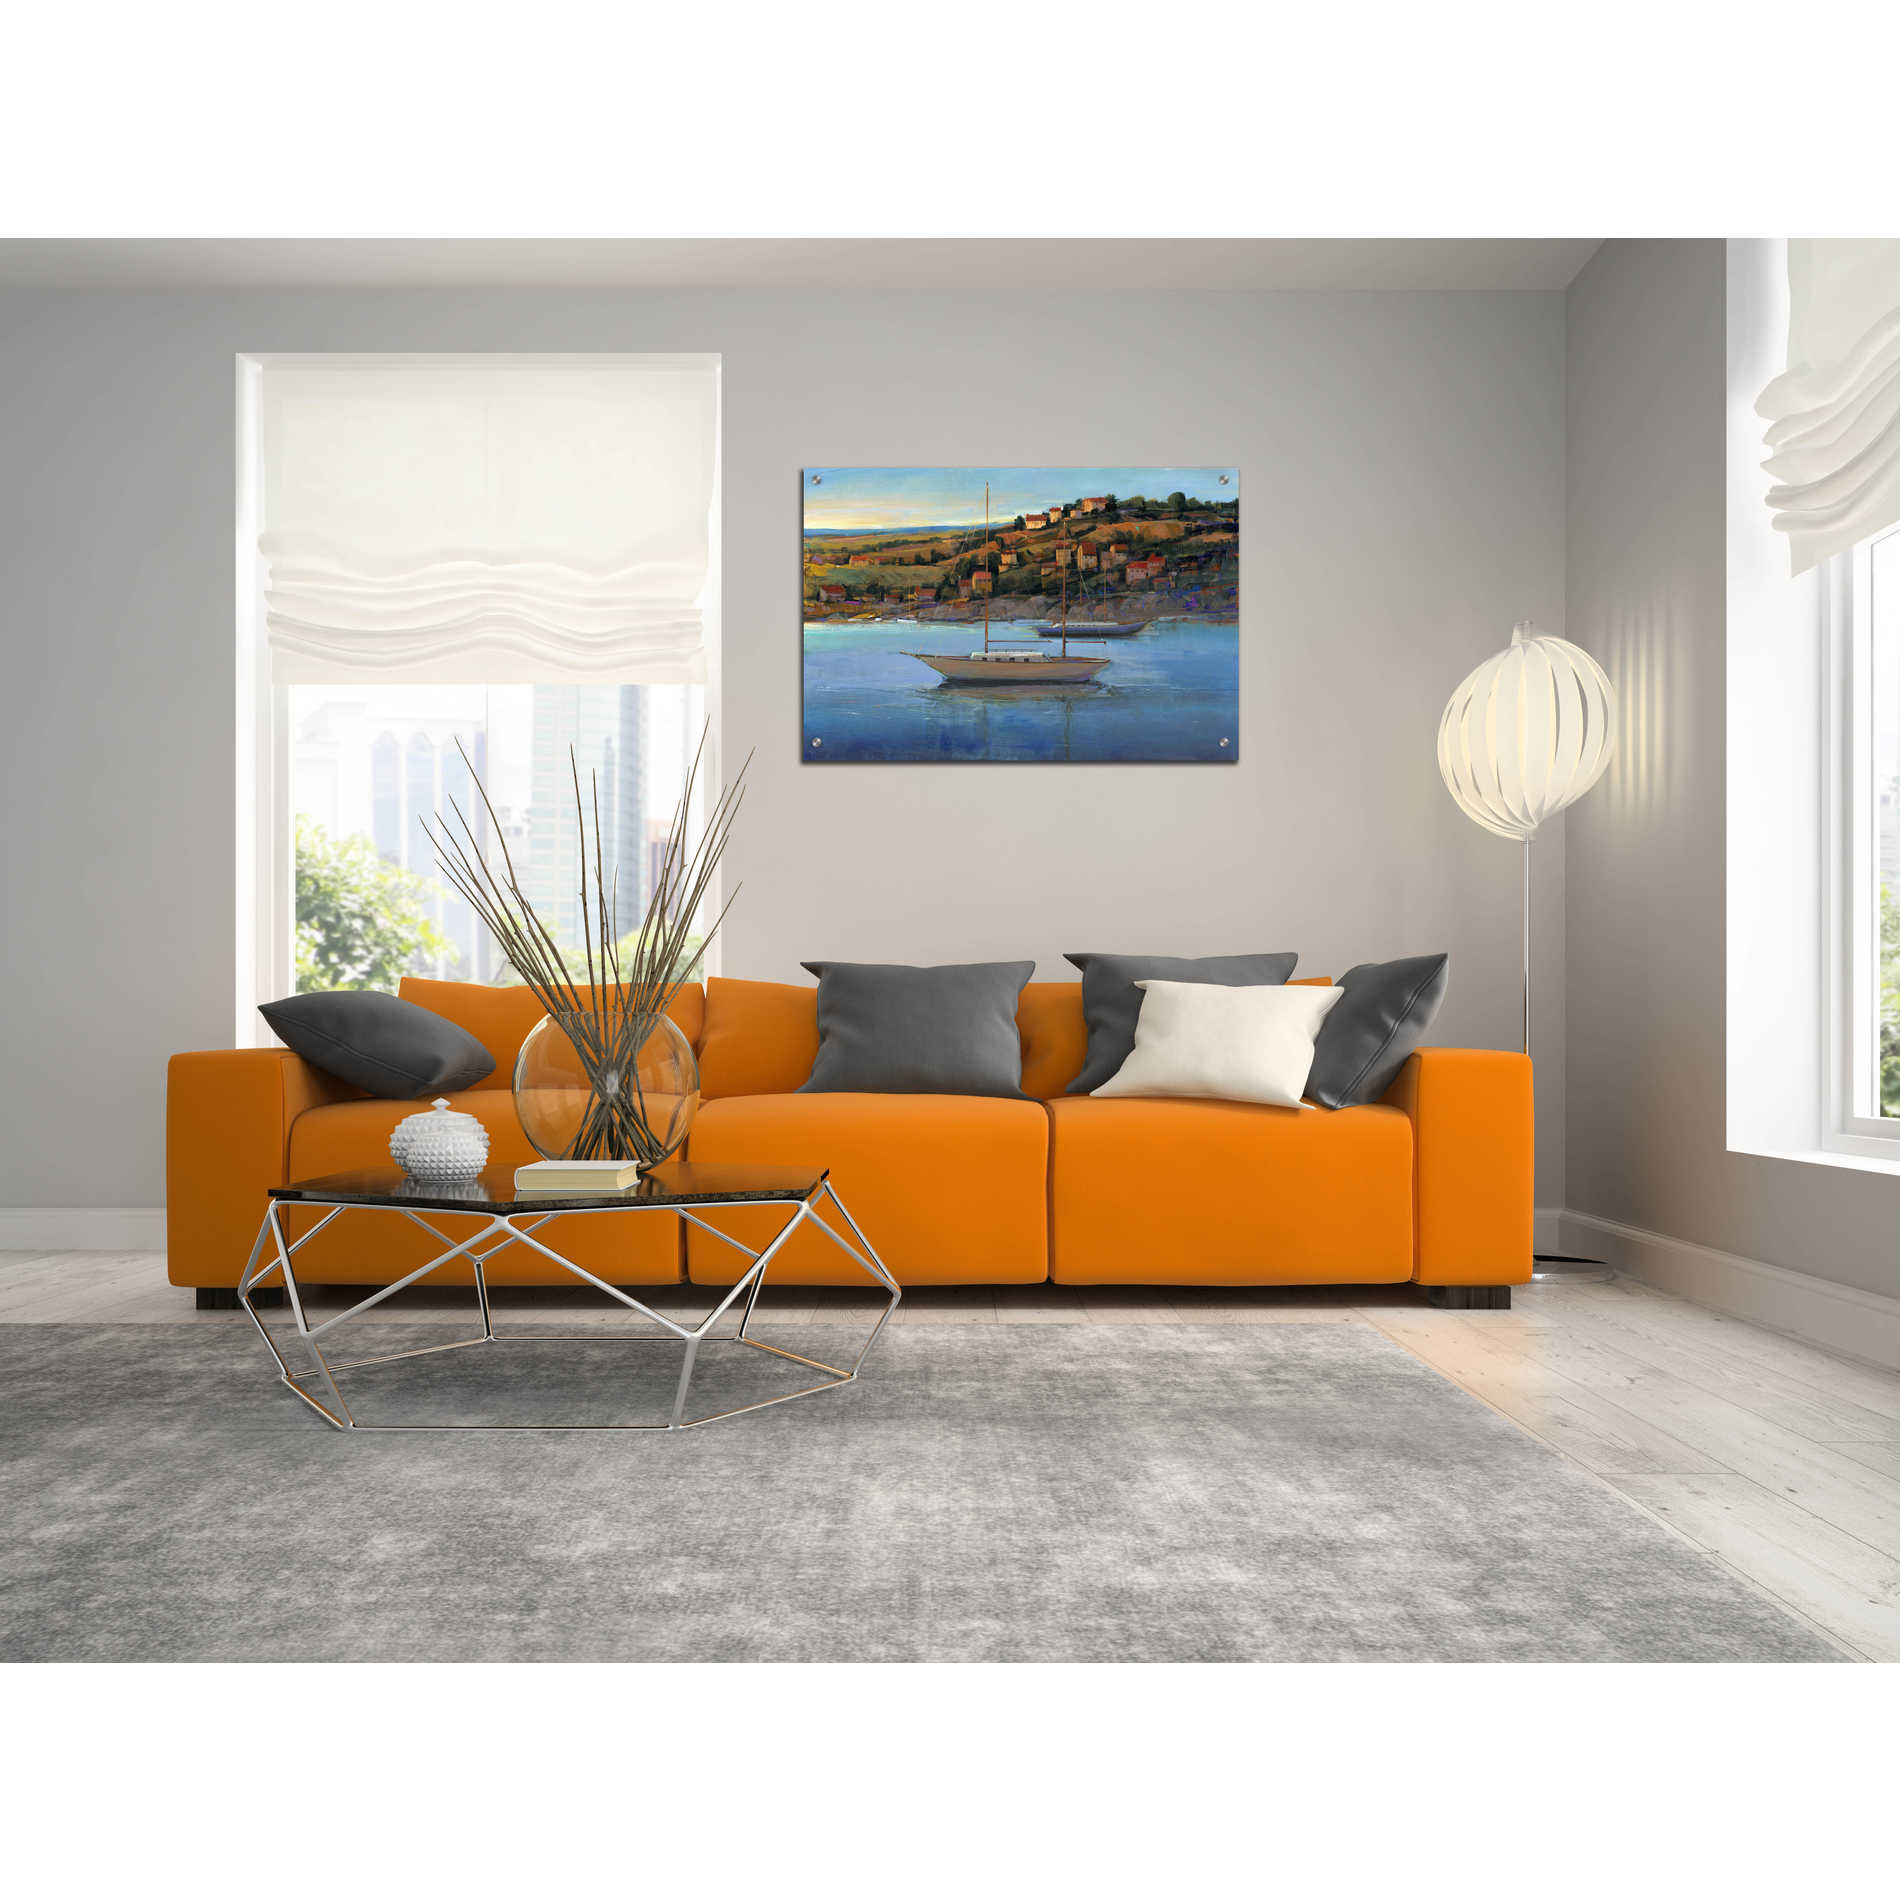 Epic Art 'Harbor View I' by Tim O'Toole, Acrylic Glass Wall Art,36x24